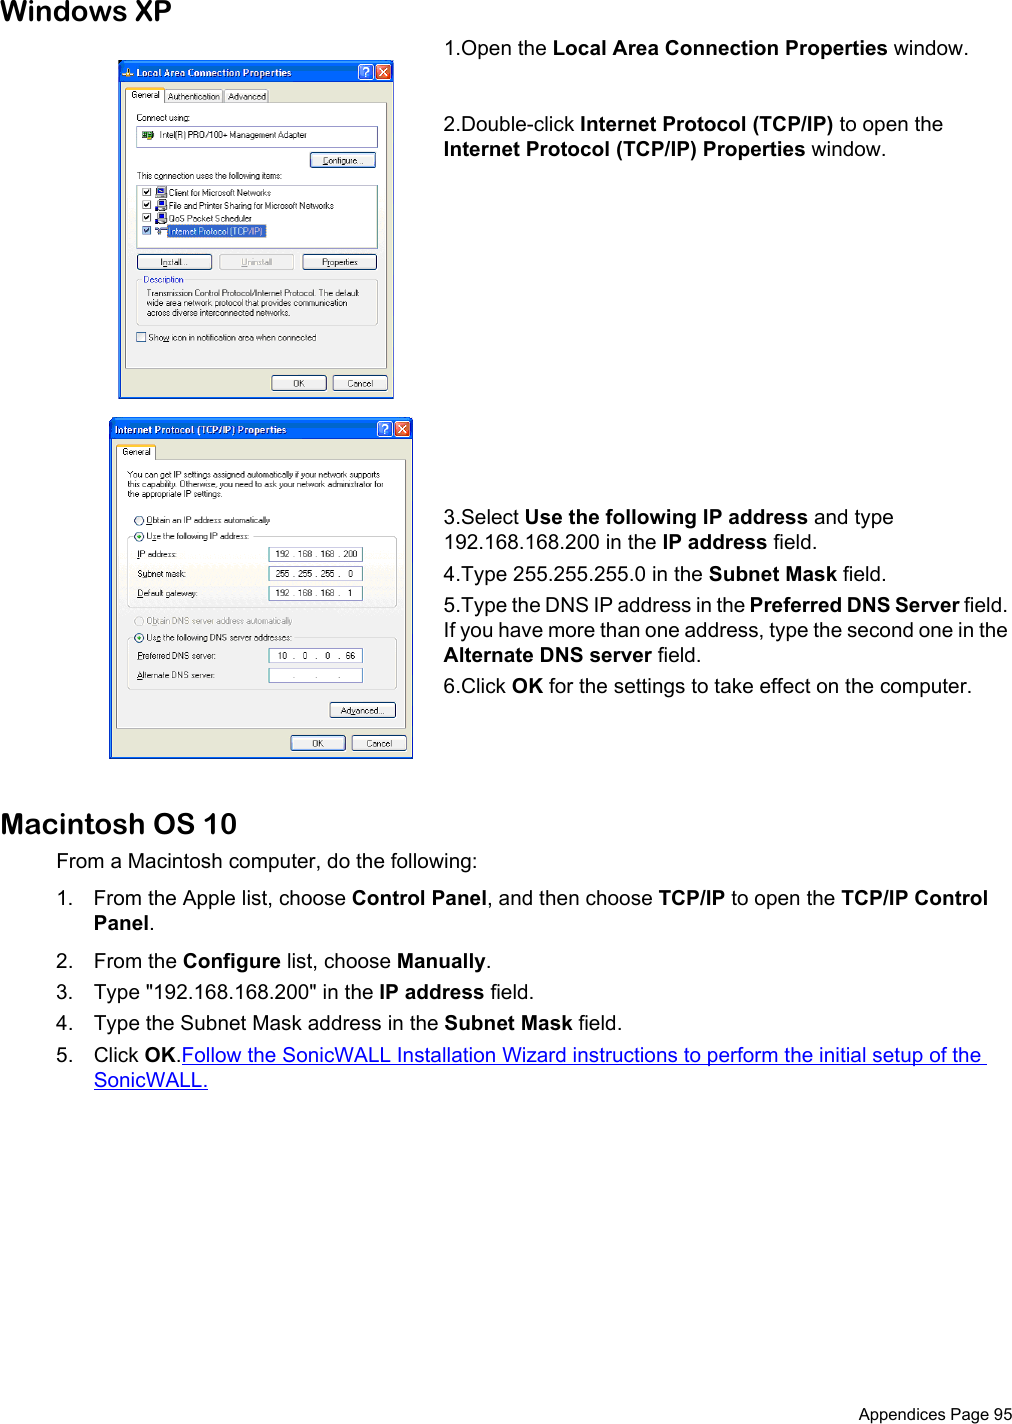  Appendices Page 95Windows XP1.Open the Local Area Connection Properties window. 2.Double-click Internet Protocol (TCP/IP) to open the Internet Protocol (TCP/IP) Properties window. 3.Select Use the following IP address and type 192.168.168.200 in the IP address field. 4.Type 255.255.255.0 in the Subnet Mask field. 5.Type the DNS IP address in the Preferred DNS Server field. If you have more than one address, type the second one in the Alternate DNS server field. 6.Click OK for the settings to take effect on the computer.Macintosh OS 10From a Macintosh computer, do the following:1. From the Apple list, choose Control Panel, and then choose TCP/IP to open the TCP/IP Control Panel.2. From the Configure list, choose Manually.3. Type &quot;192.168.168.200&quot; in the IP address field.4. Type the Subnet Mask address in the Subnet Mask field. 5. Click OK.Follow the SonicWALL Installation Wizard instructions to perform the initial setup of the SonicWALL. 